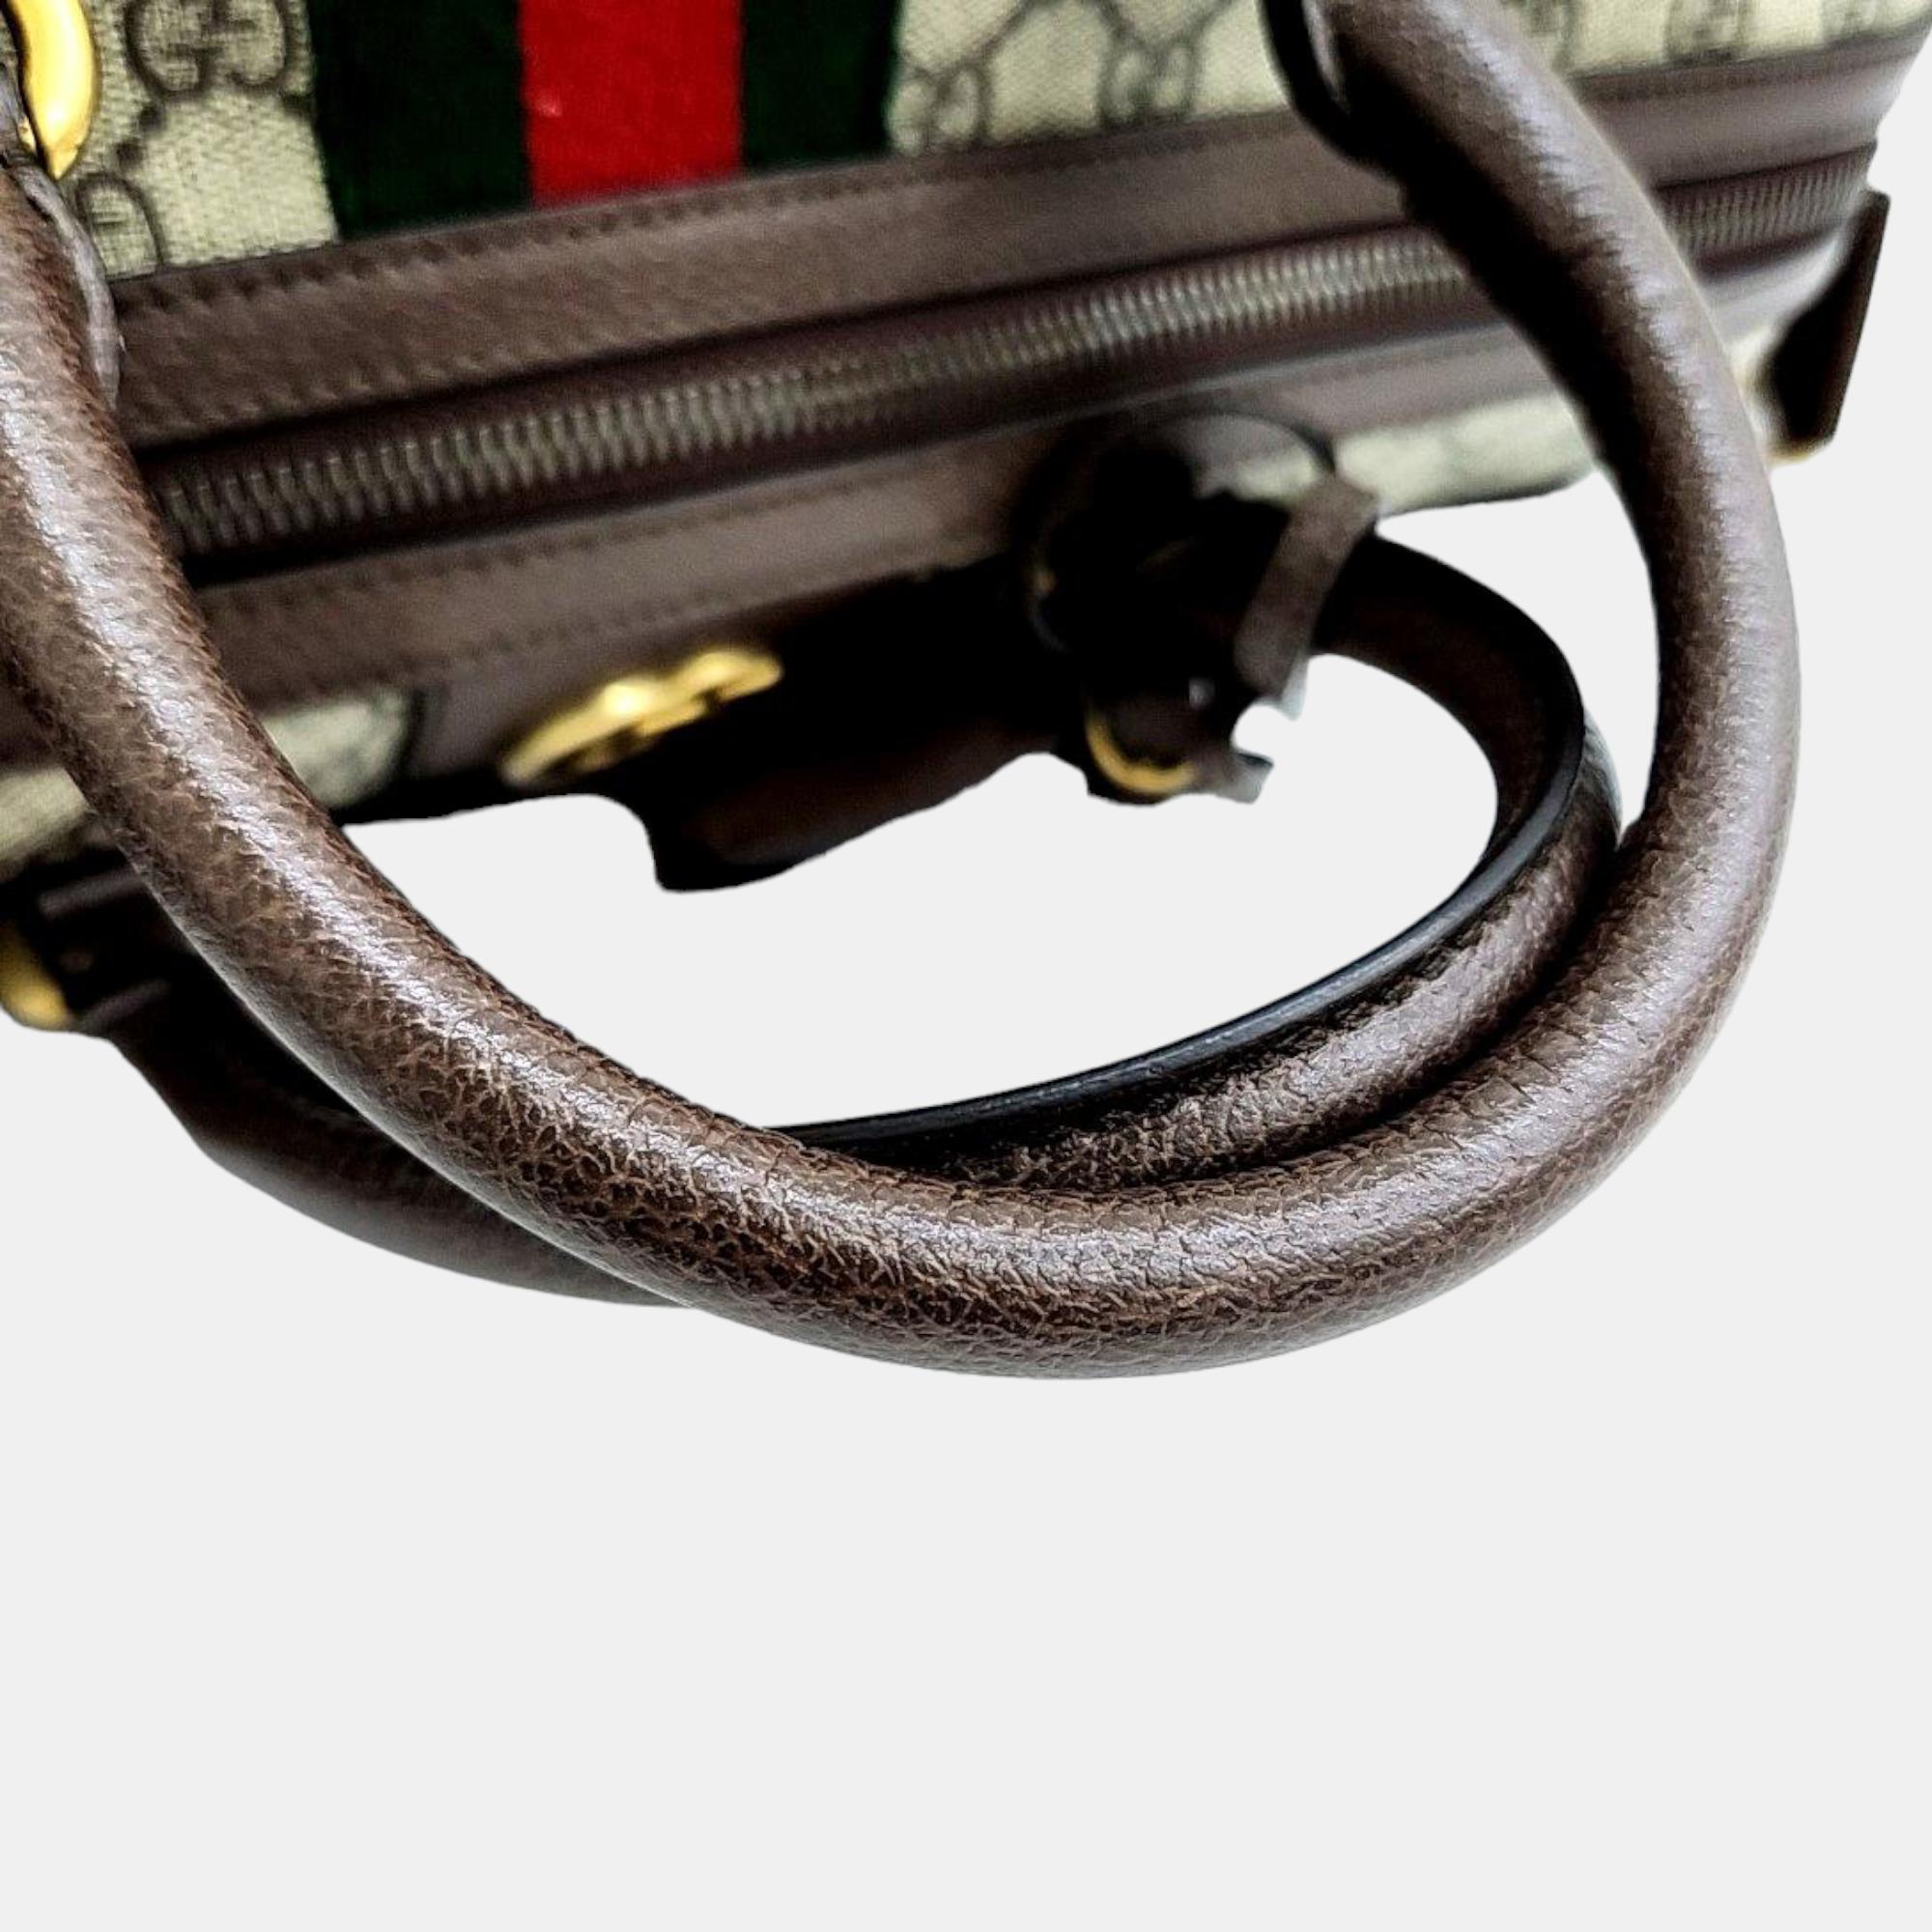 Gucci Ophidia Carry On Duffel Bag (547953)